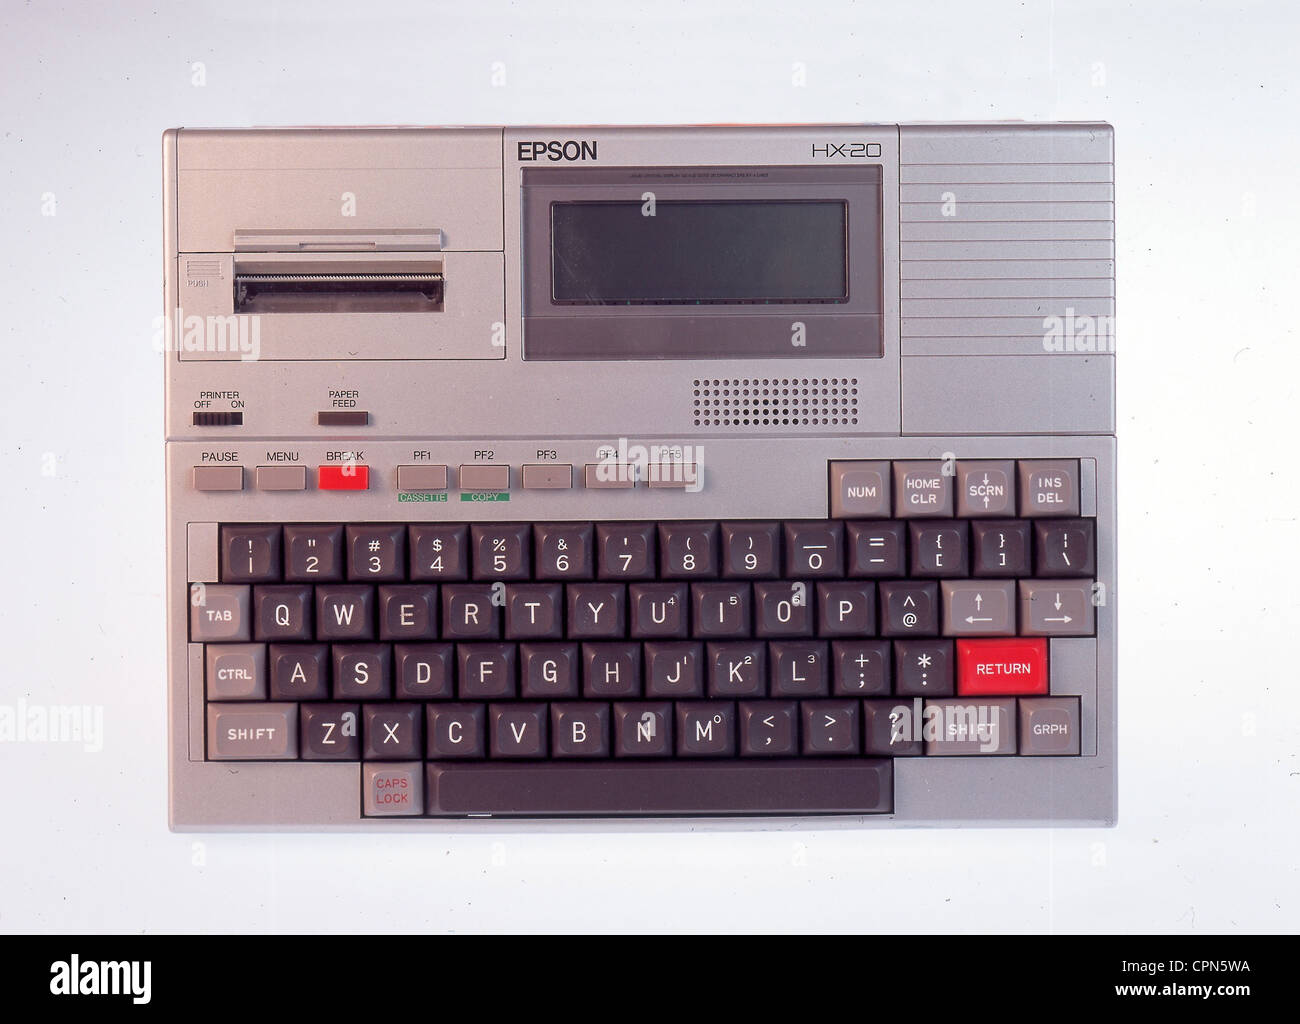 computing / electronics,computer,first laptop of the world Epson HX-20,made by Seiko Epson Corp.,with integrated LCD display,four lines with 20 letters,Made in Japan,1982,printer with 5 centimeter wide paper from the roll,16 kilobyte(maximal 32 KB)working memory,integrated accumulator,interface RS-232C,weight: 1.6 kilo,dimension DIN A4,first hand-held,original price in Germany 1982: 1798 Mark,Liquid Crystal Display,liquid crystal display,integrated dot-matrix printer,typewriter keyboard,EDP,IT,display,keyboard,keyboards,laptop,laptop,Additional-Rights-Clearences-Not Available Stock Photo